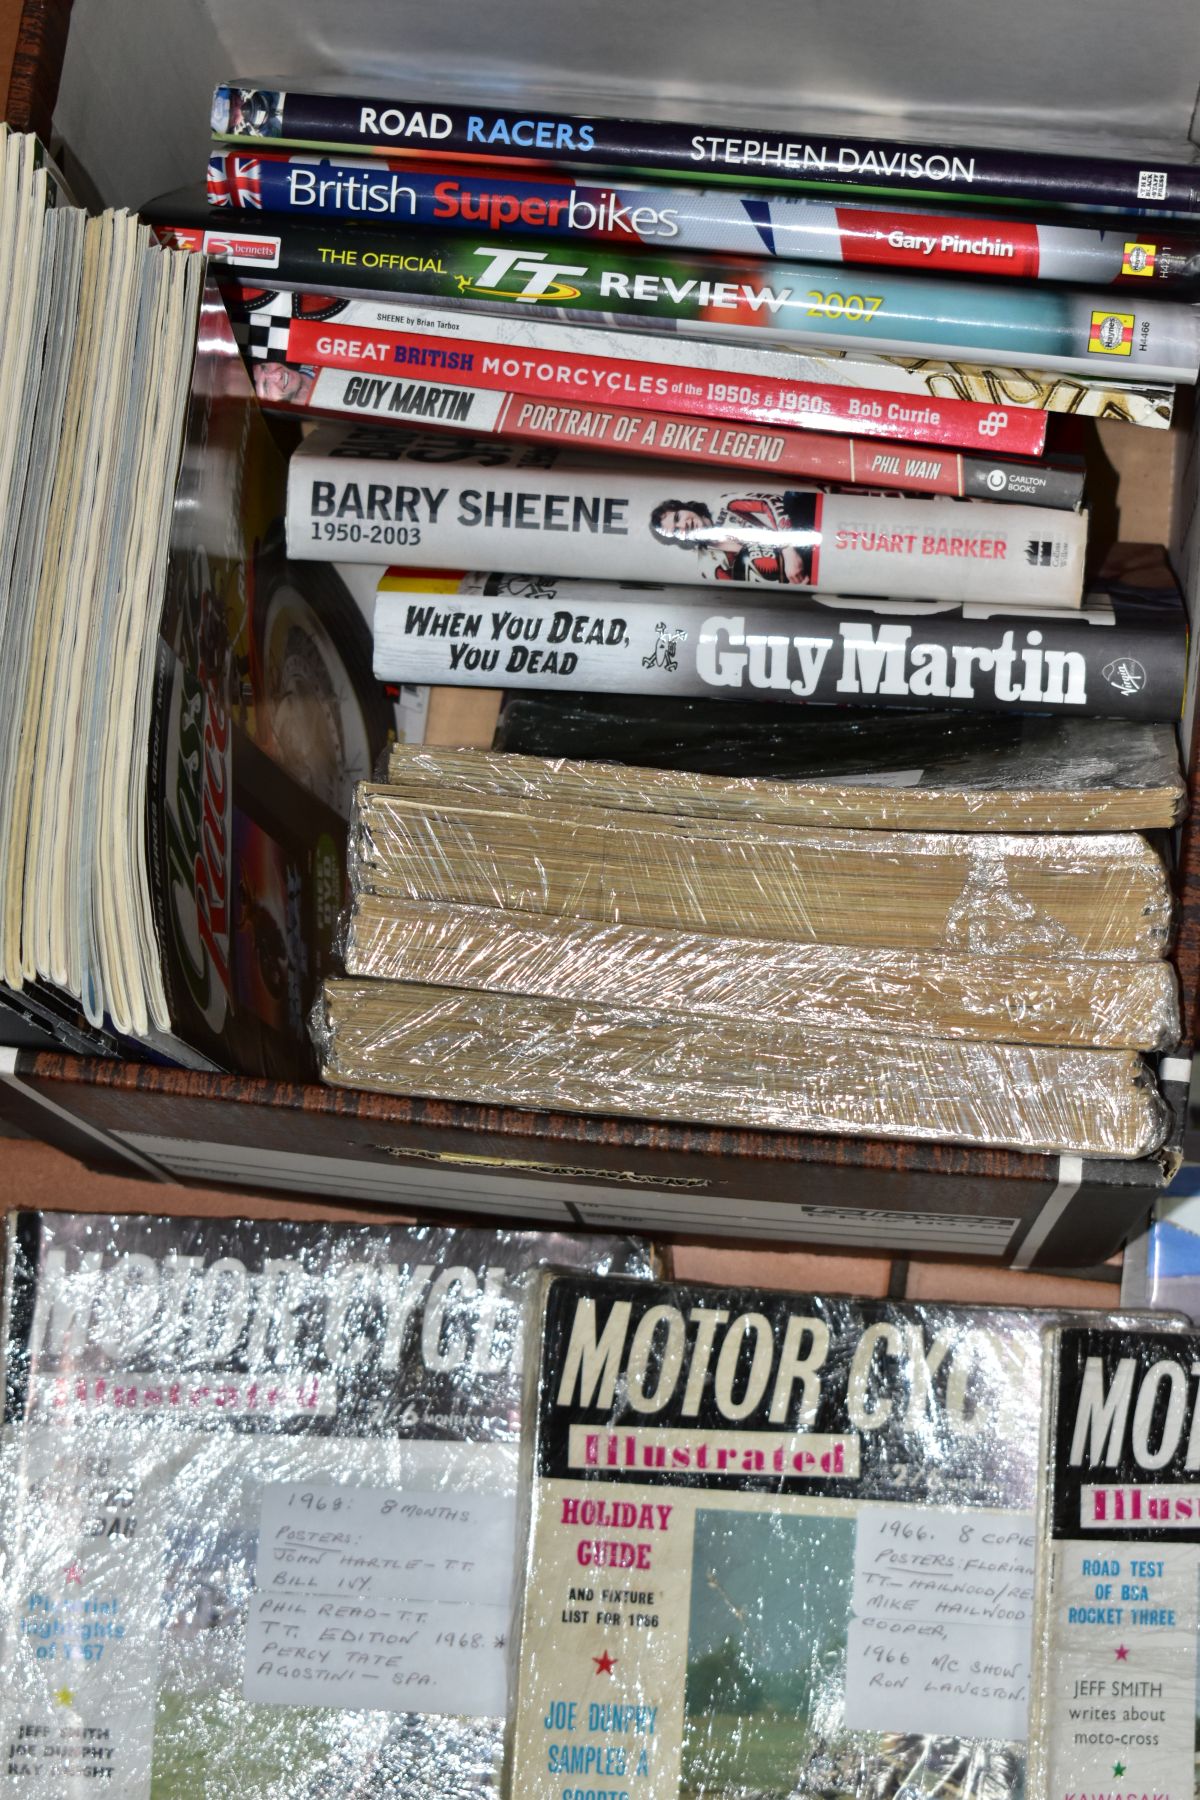 MOTORCYCLE BOOKS & MAGAZINES comprising books featuring Guy Martin, Barry Sheene, TT, British - Image 2 of 3